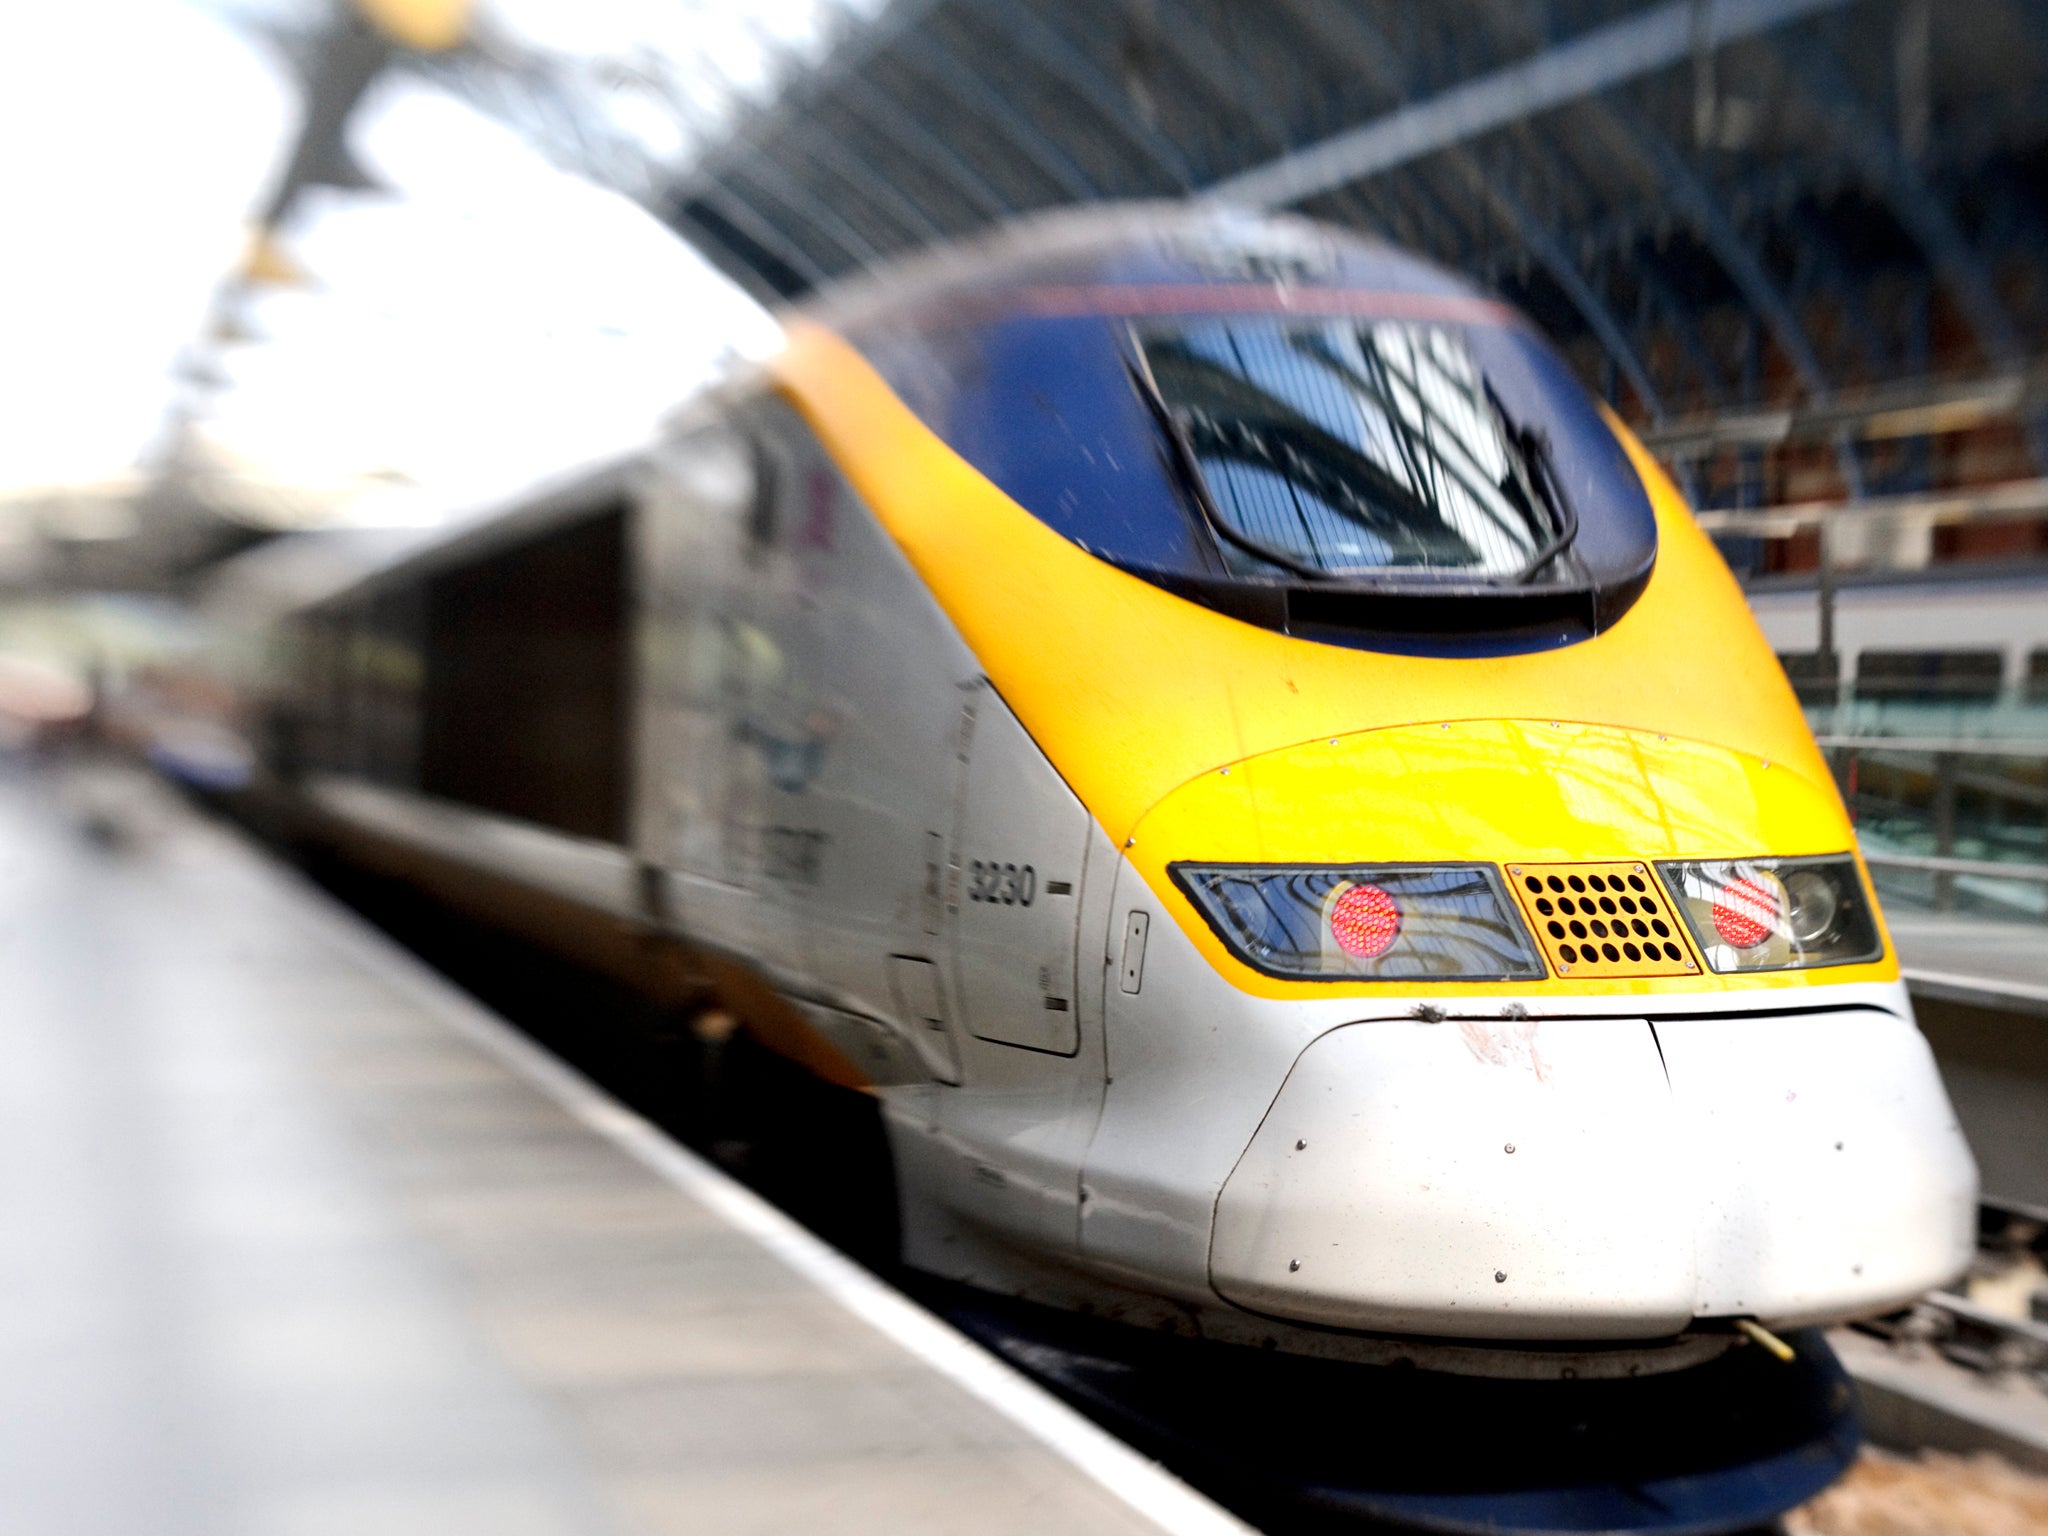 The UK is expected to sell its 40 per cent stake in the Eurostar rail service